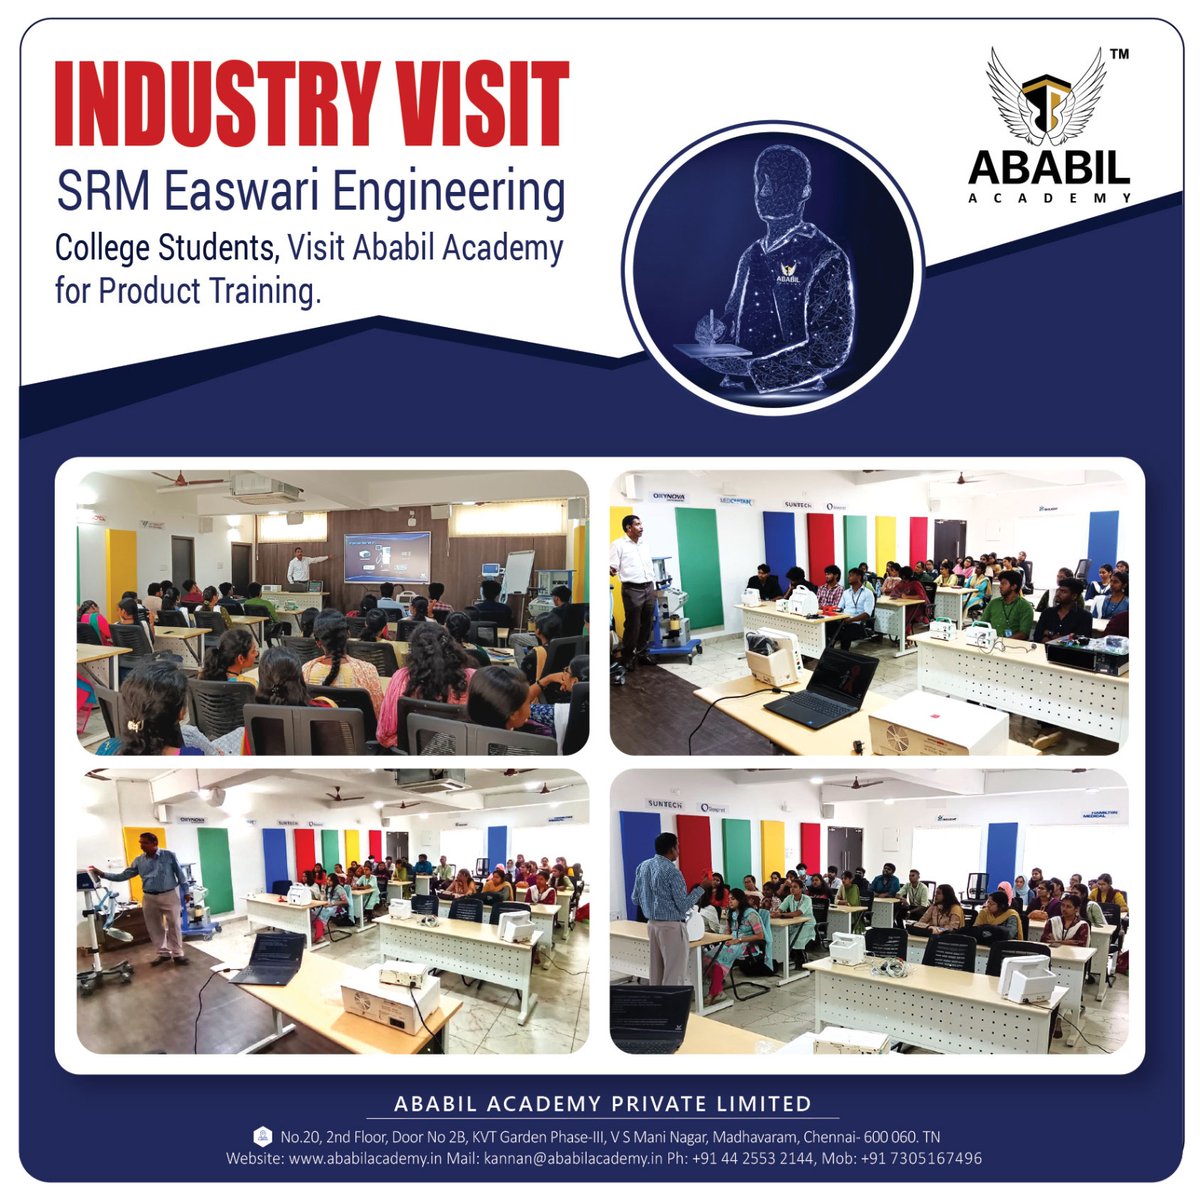 SRM Easwari Engineering College students recently had a fantastic industry visit at Ababil Academy for an insightful product training session. 
#IndustryVisit #ProductTraining #EngineeringEducation #AbabilAcademy #SRMEaswariEngineeringCollege  
#SRMEaswari #Education #Chennai